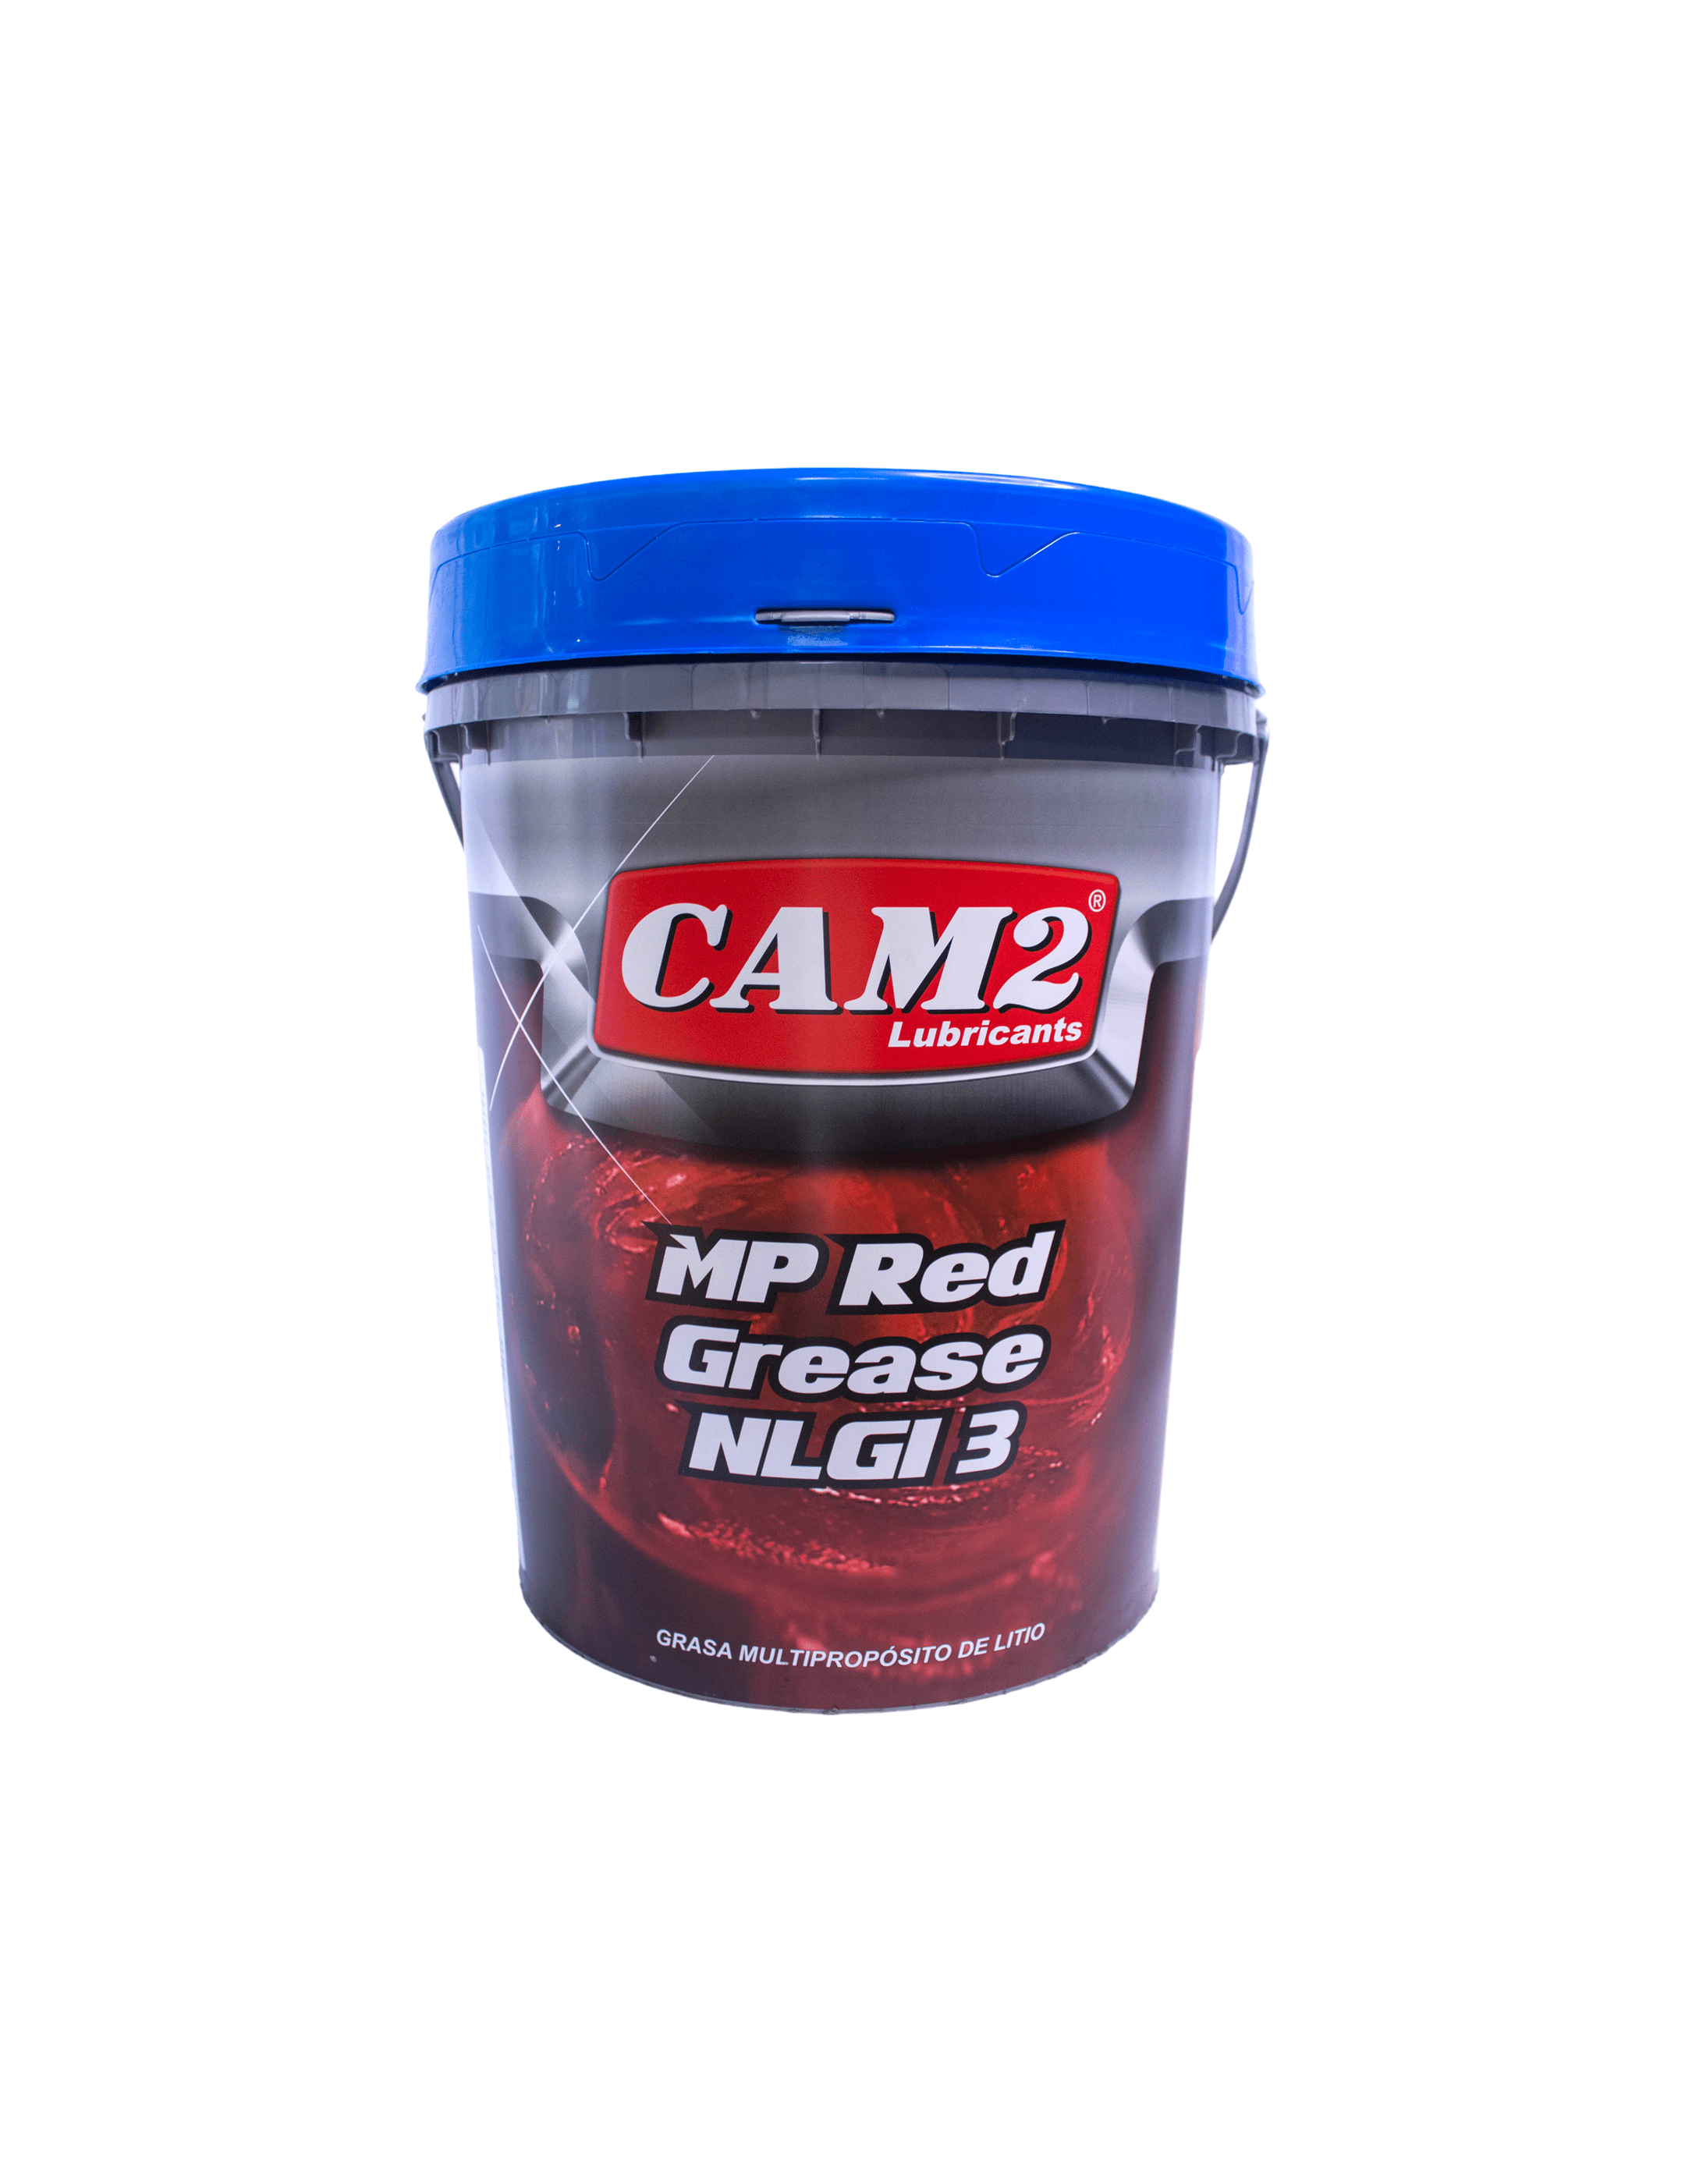 CAM2 MP RED GREASE NGLI3 35LBS